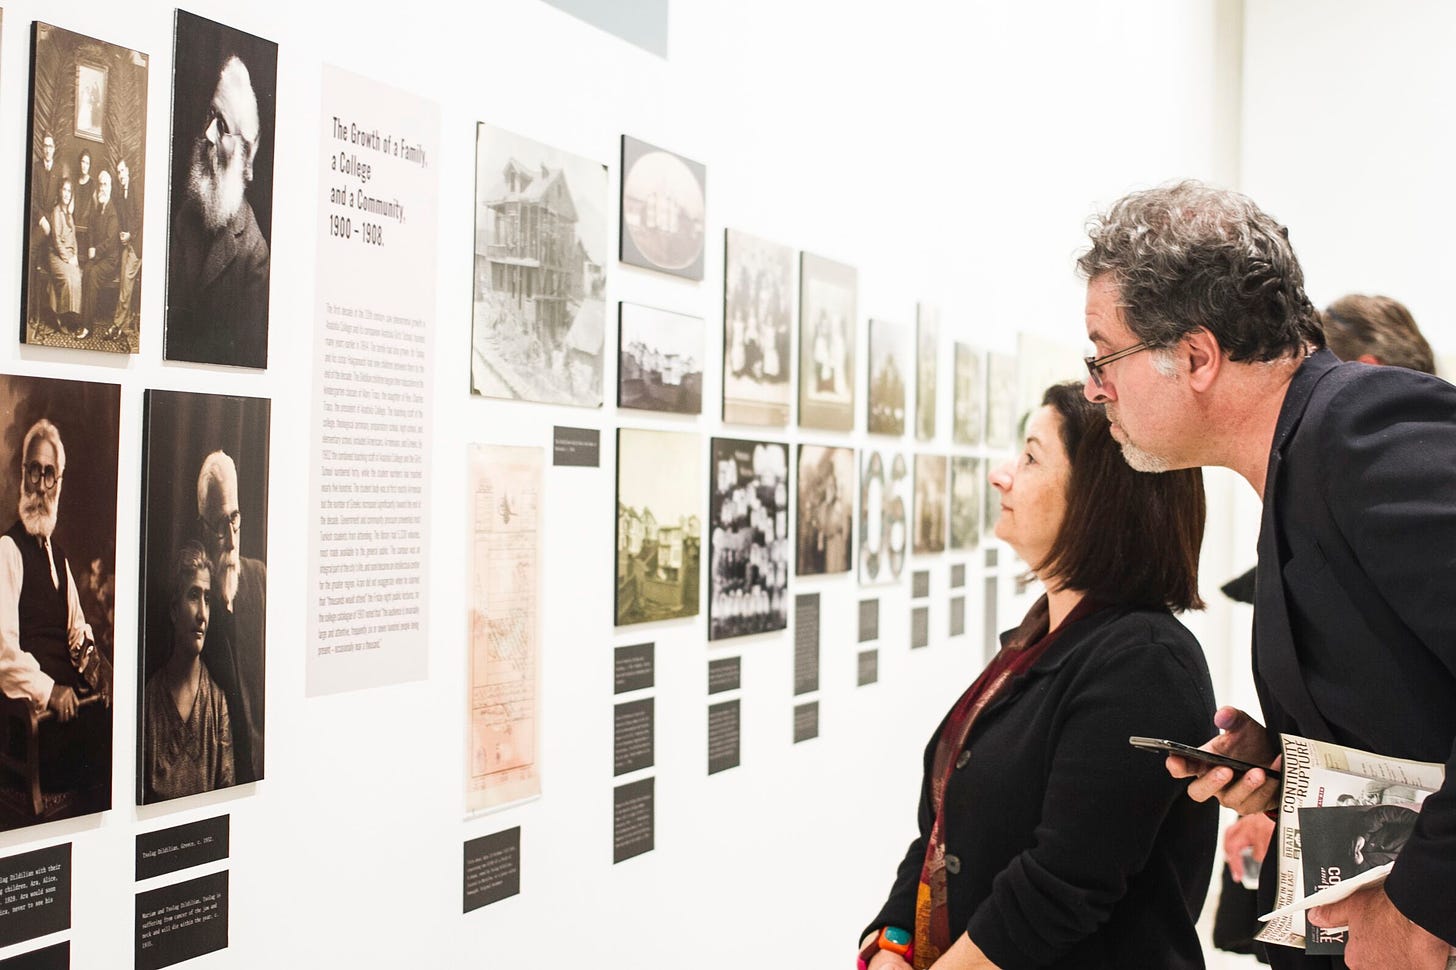 Two gallery visitors are shown examining photographs and historical documents in a white gallery space.